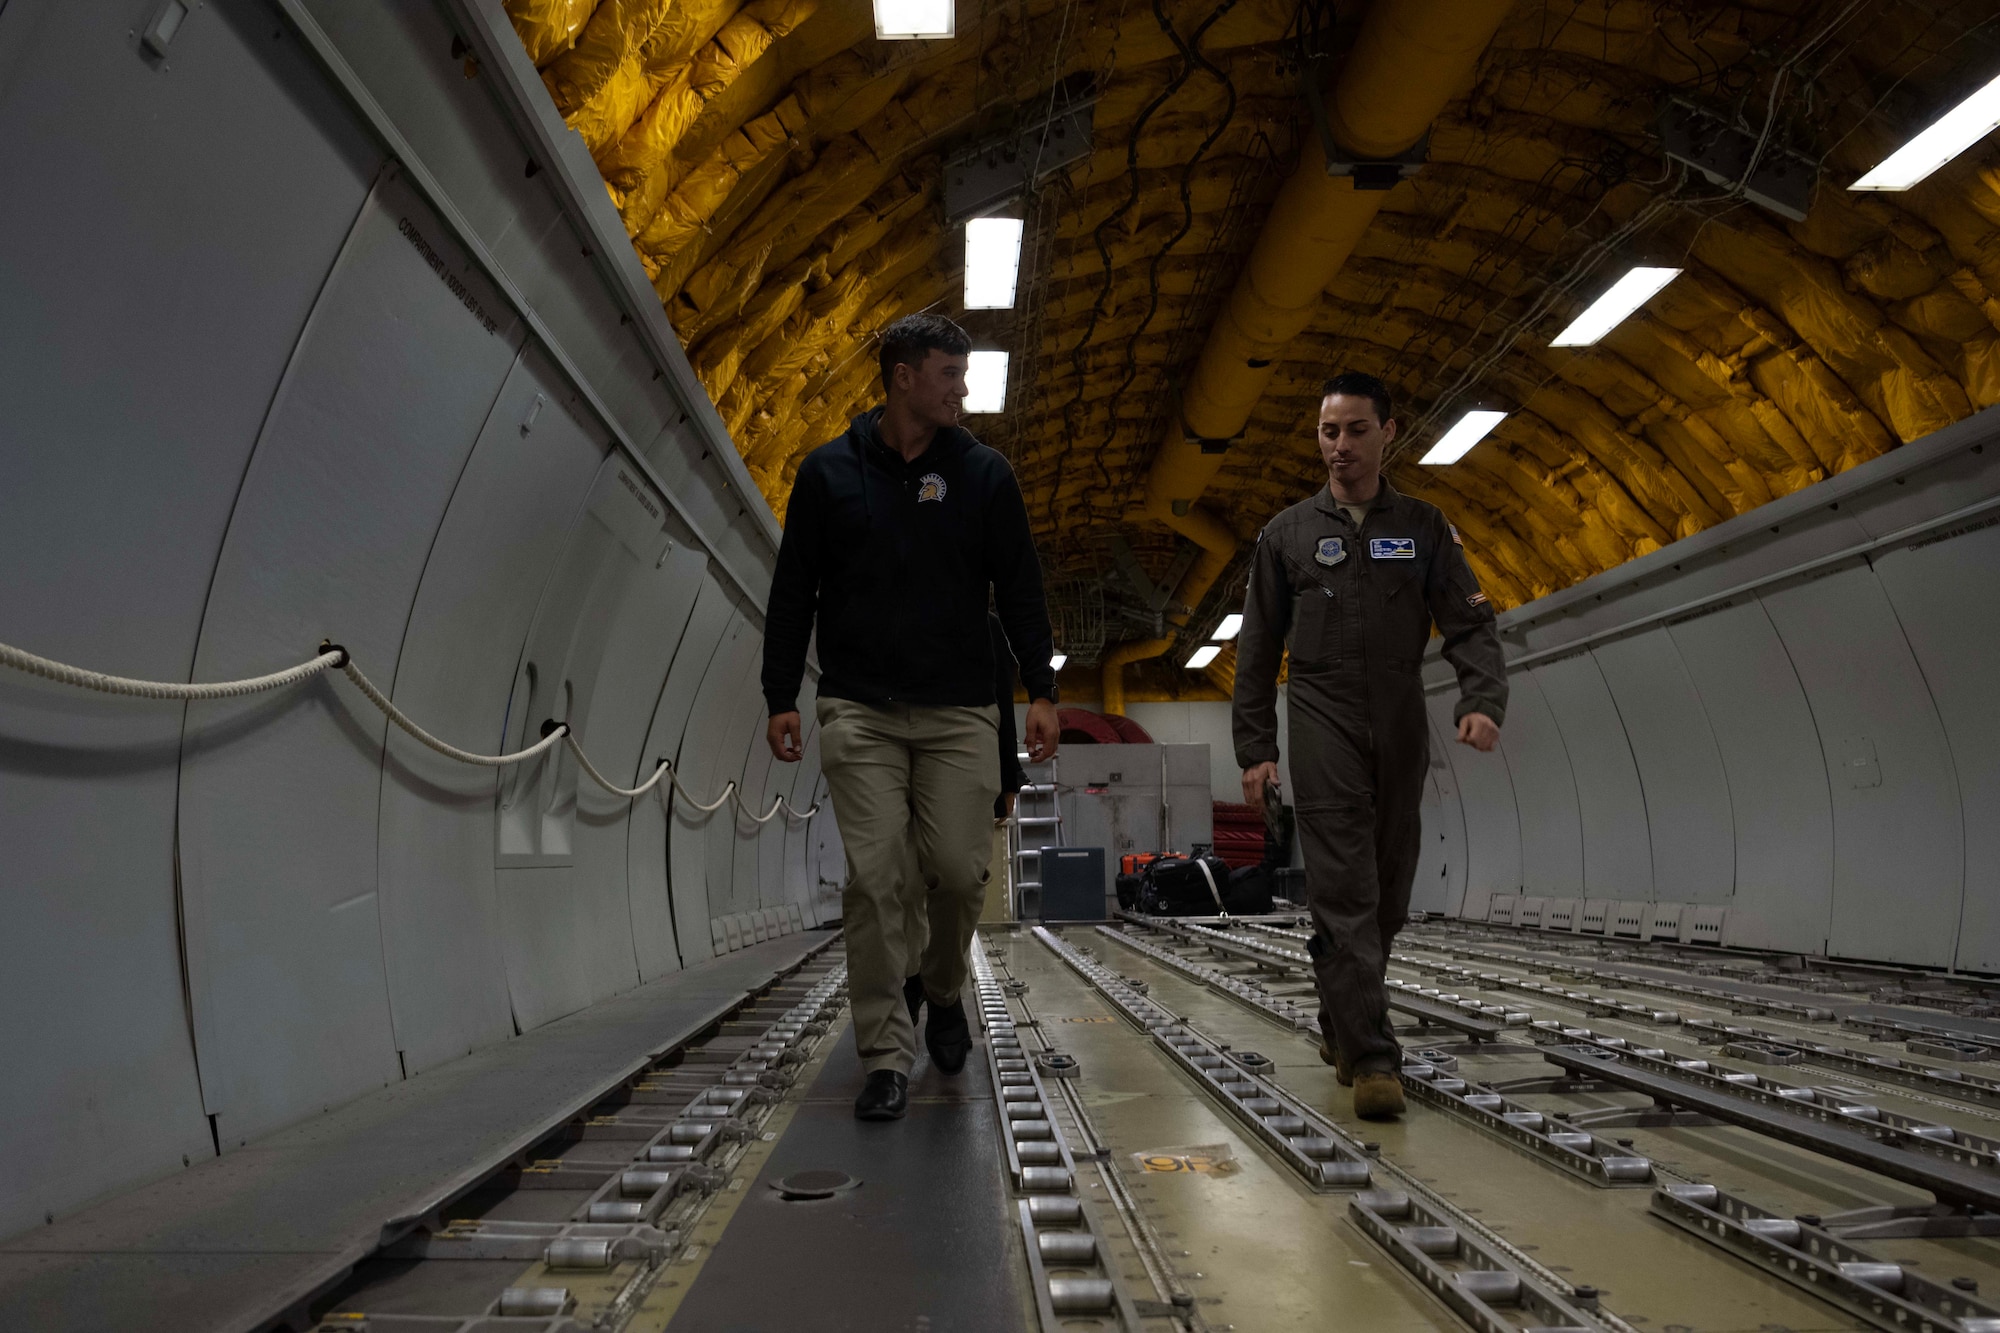 An Airman walks with a cadet through the cargo hold of a military aircraft